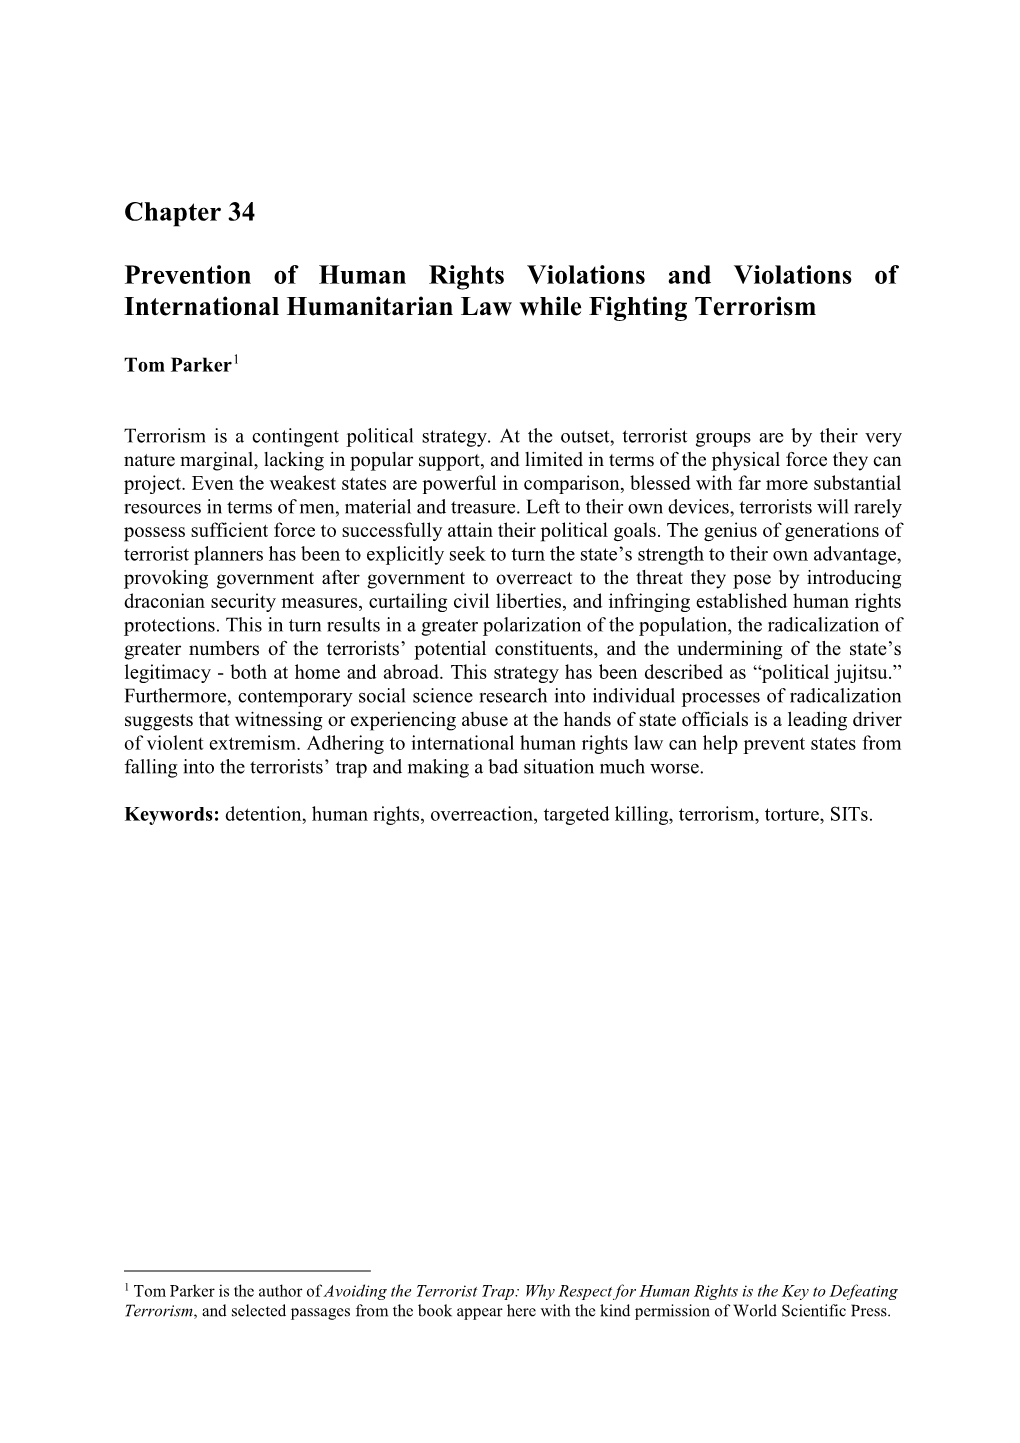 Chapter 34 Prevention of Human Rights Violations and Violations Of